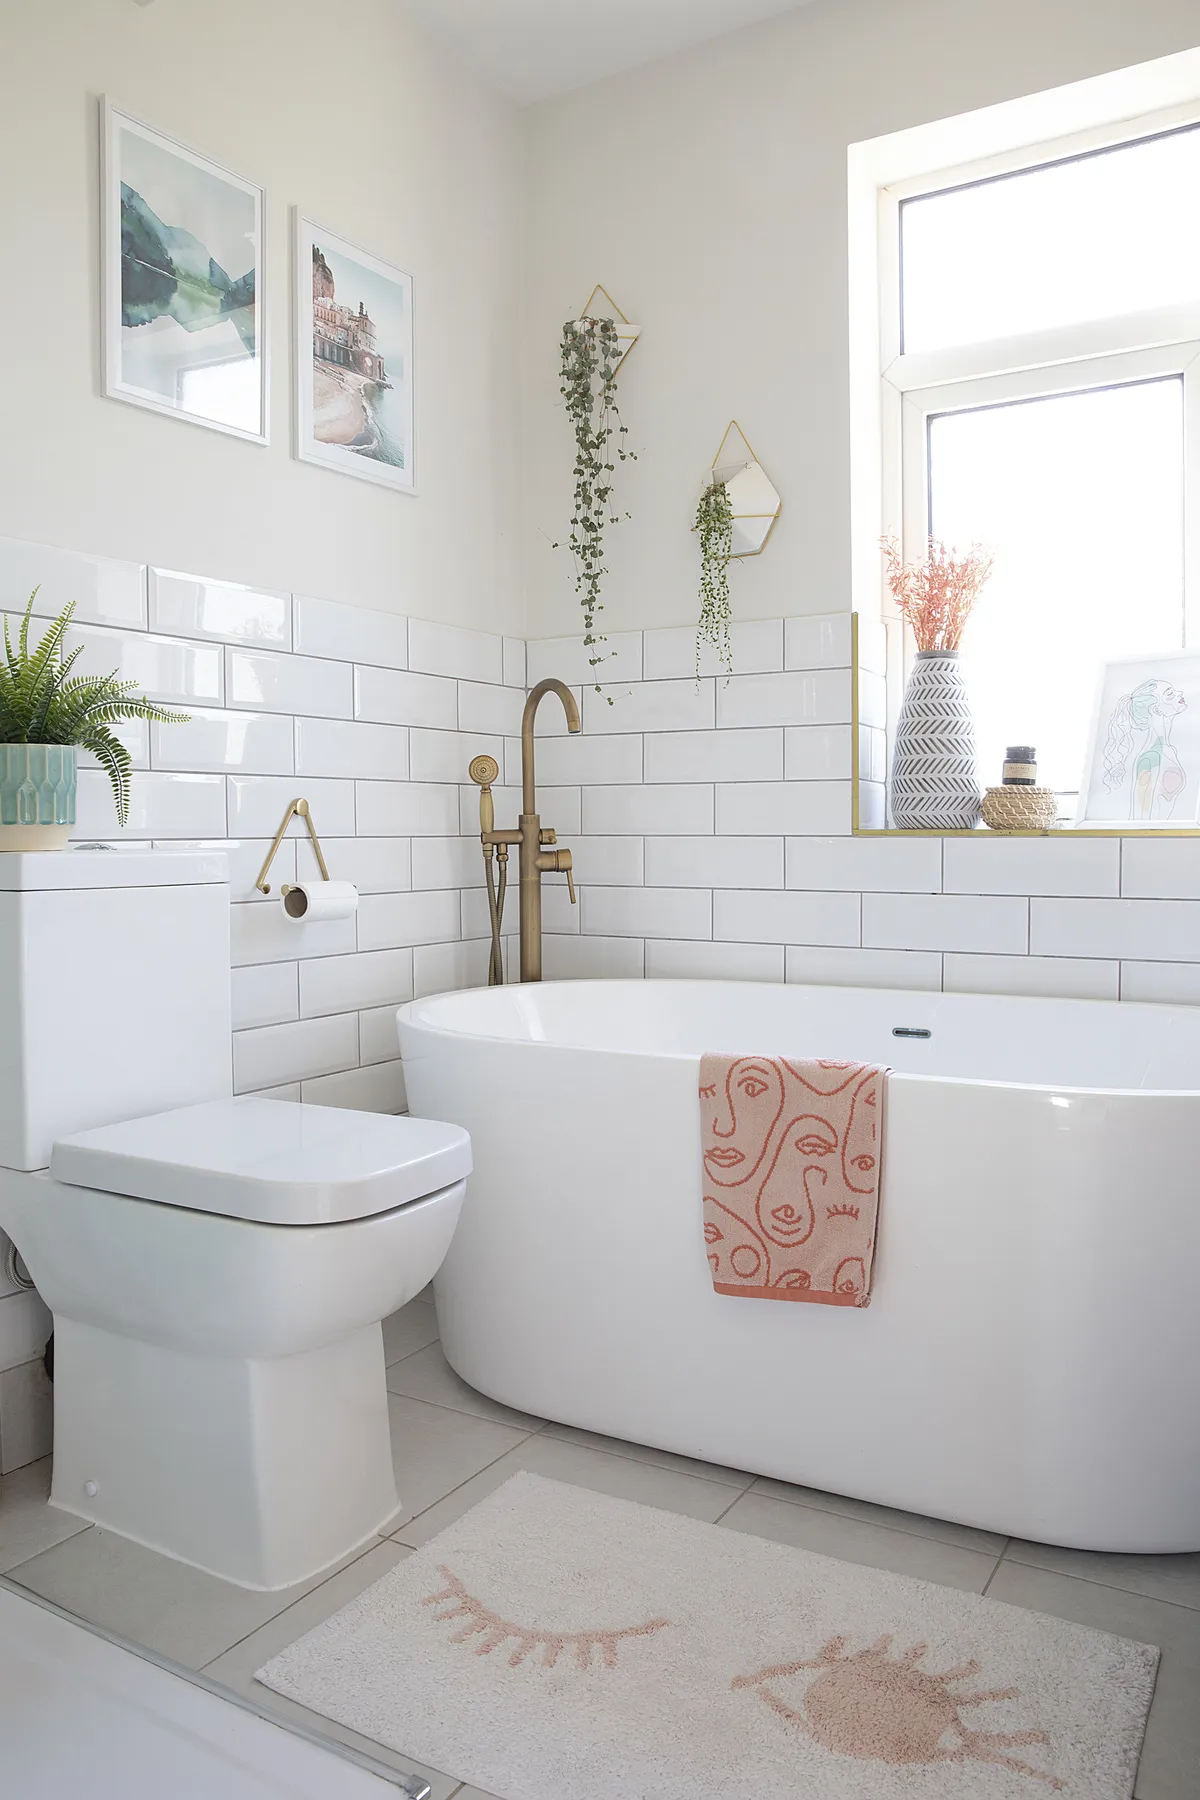 ‘A free-standing bath from Easy Bathrooms was the perfect solution to free up space without compromising on style and luxury,’ says Laura. ‘Even though it’s compact, it’s really deep and a great place for unwinding at the end of the day’